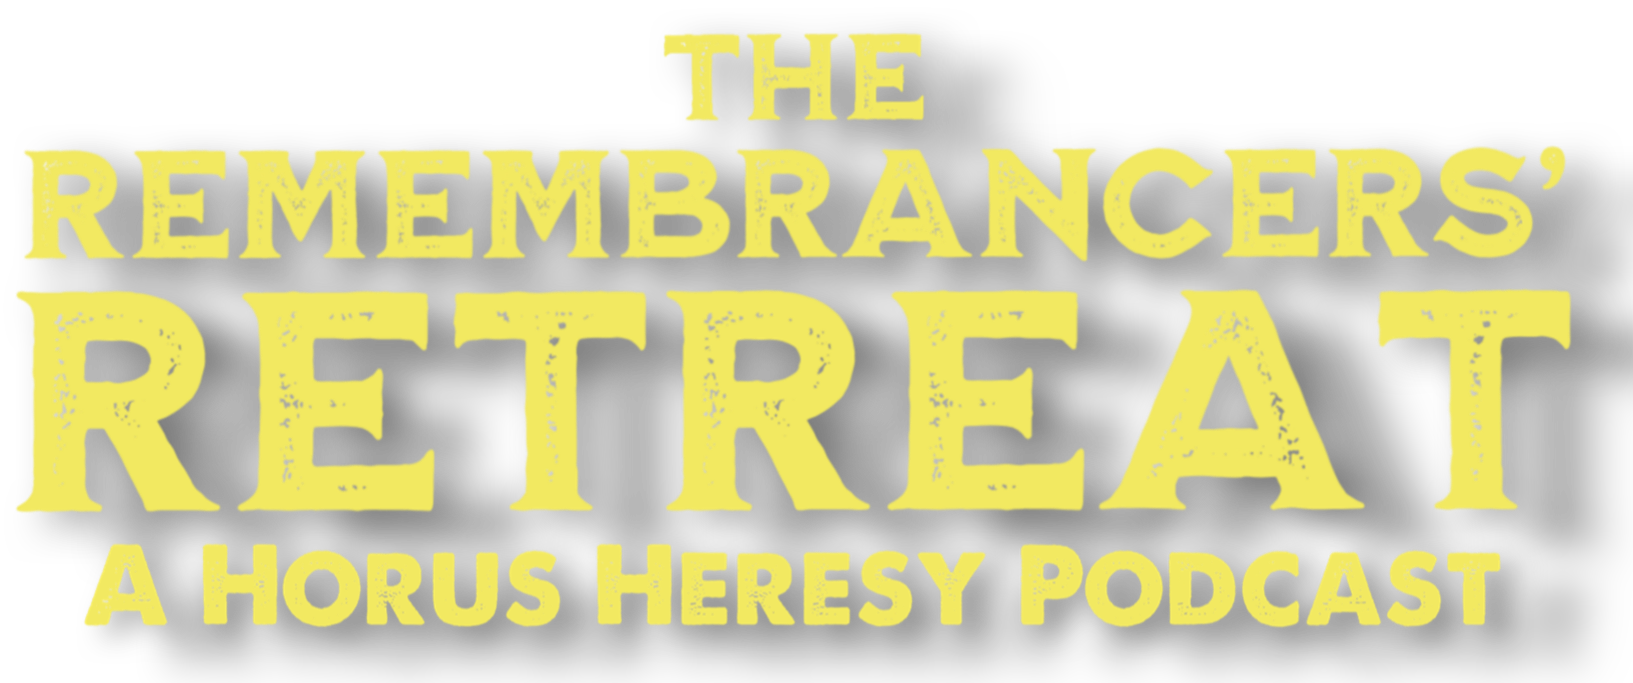 The Remembrancers’ Retreat: A Horus Heresy Wargaming Podcast